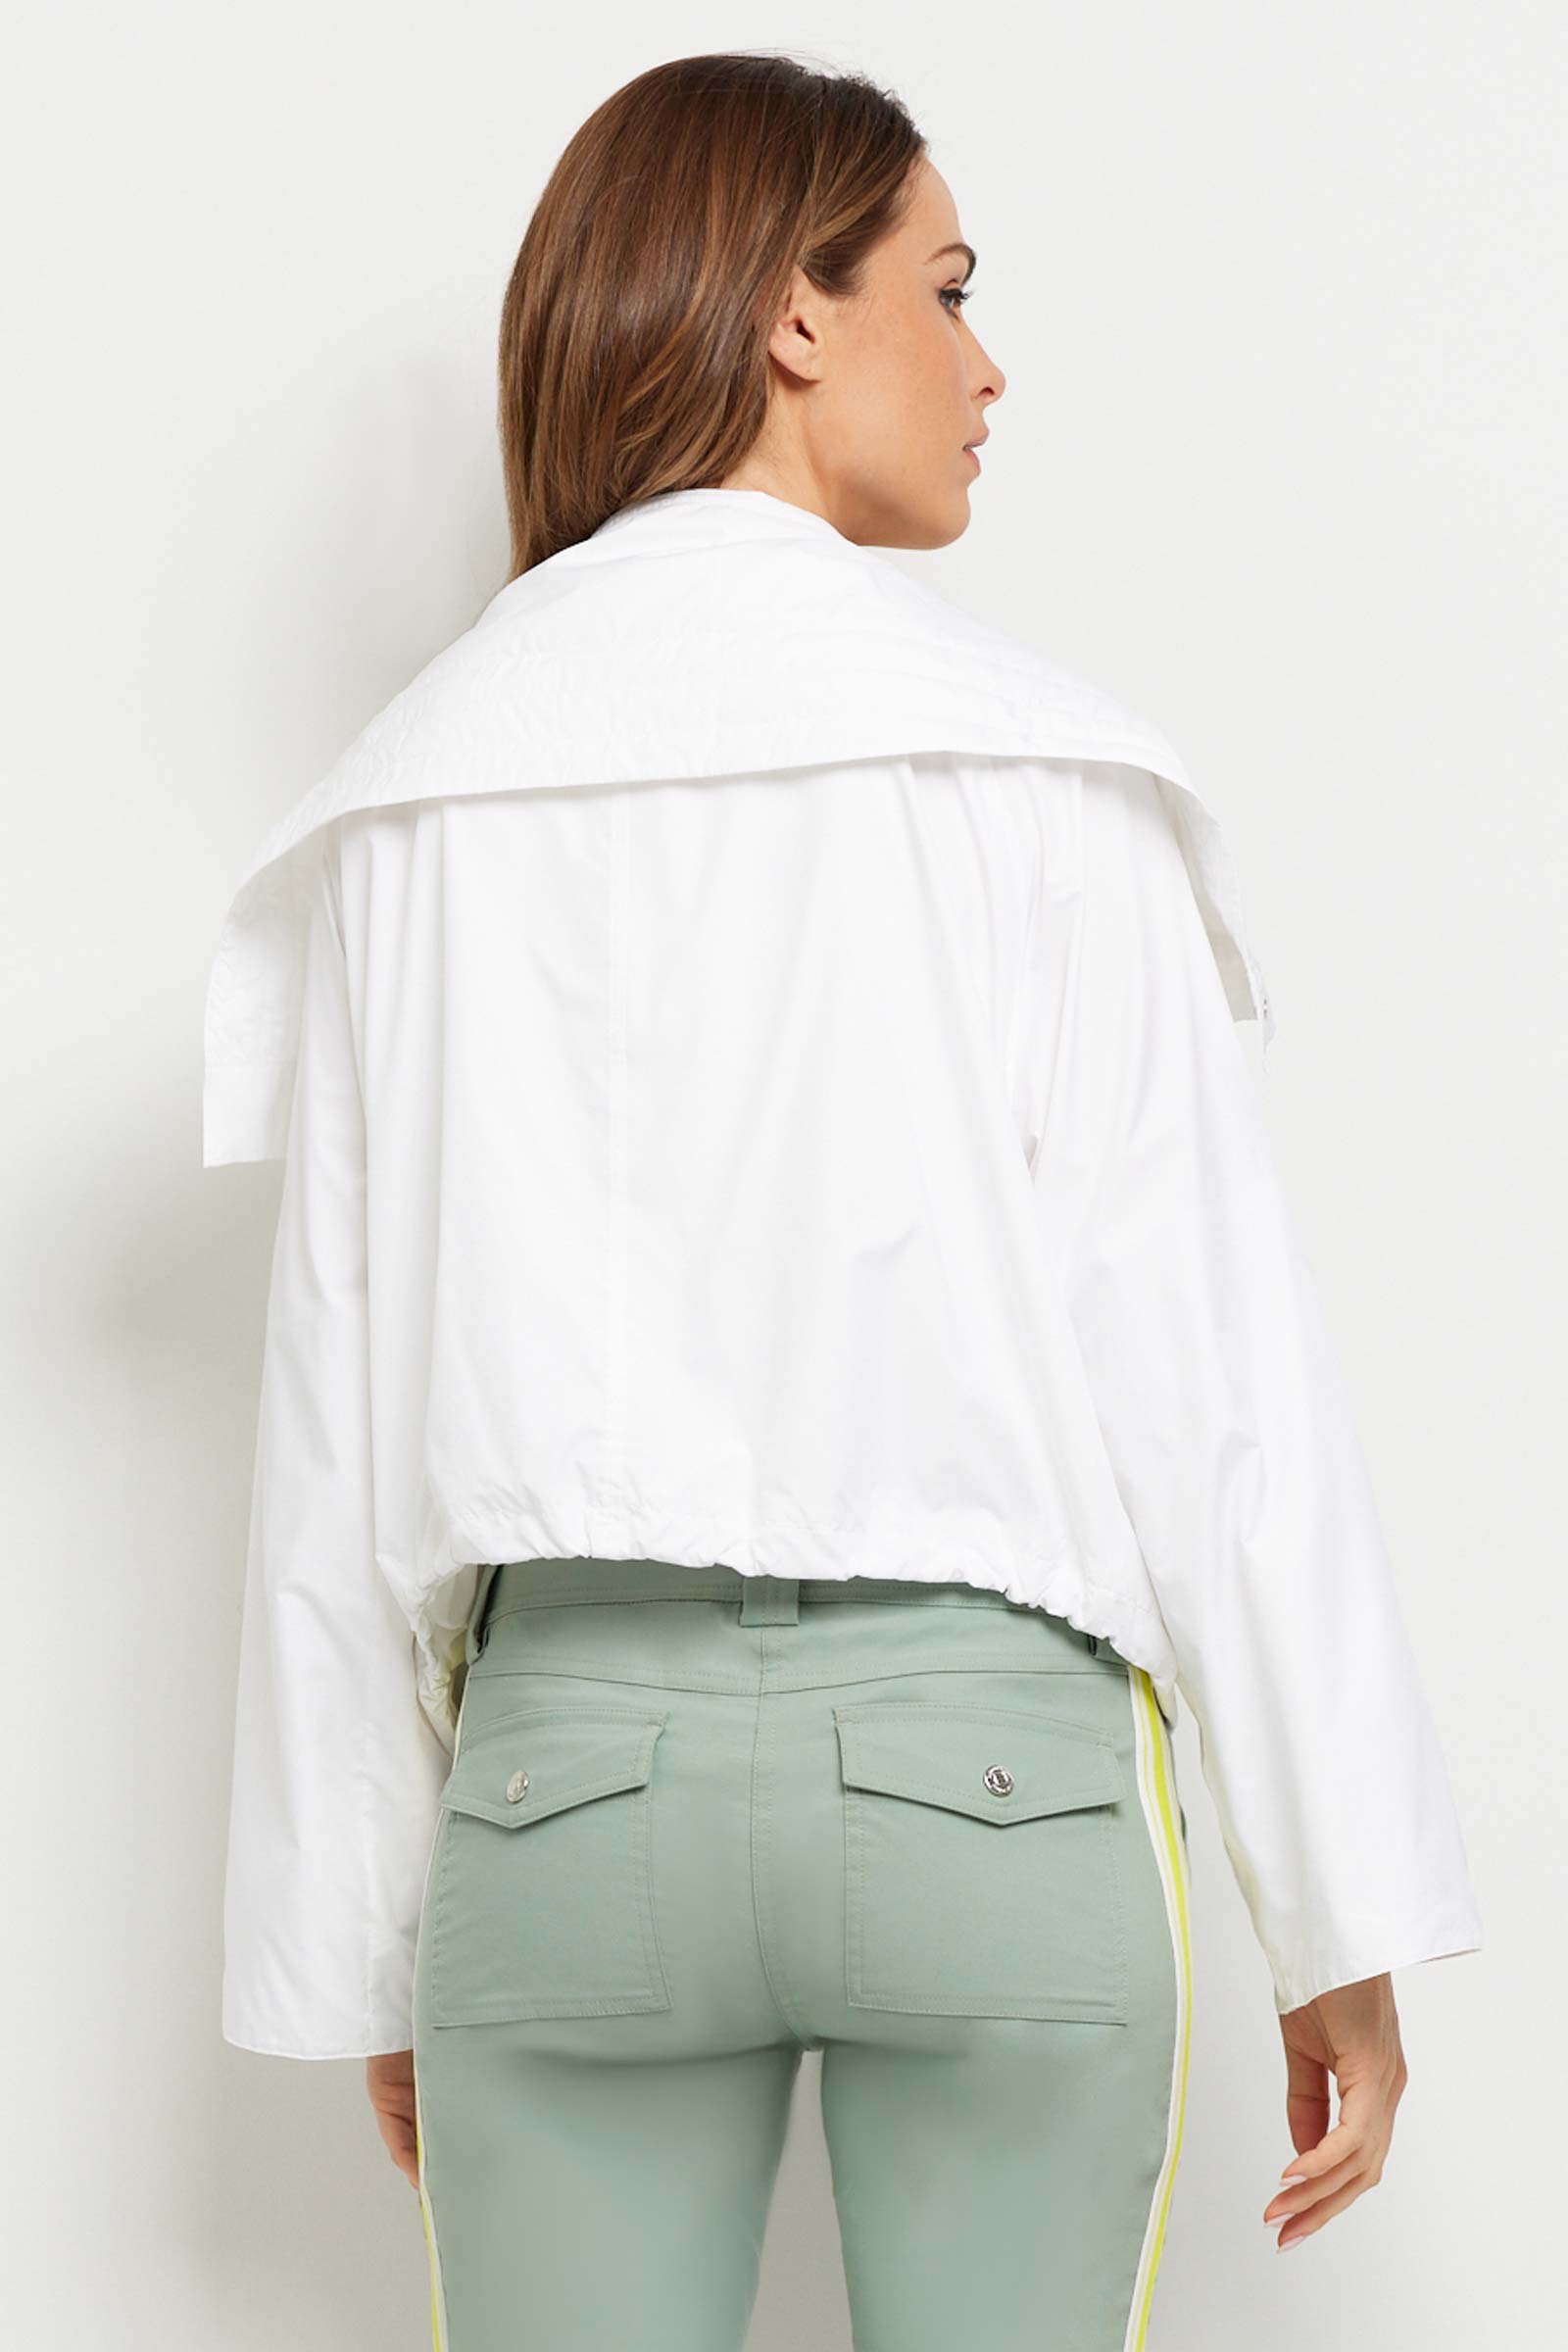 The Best Travel Jacket. Woman Showing the Back Profile of a Casey Windbreaker in White.